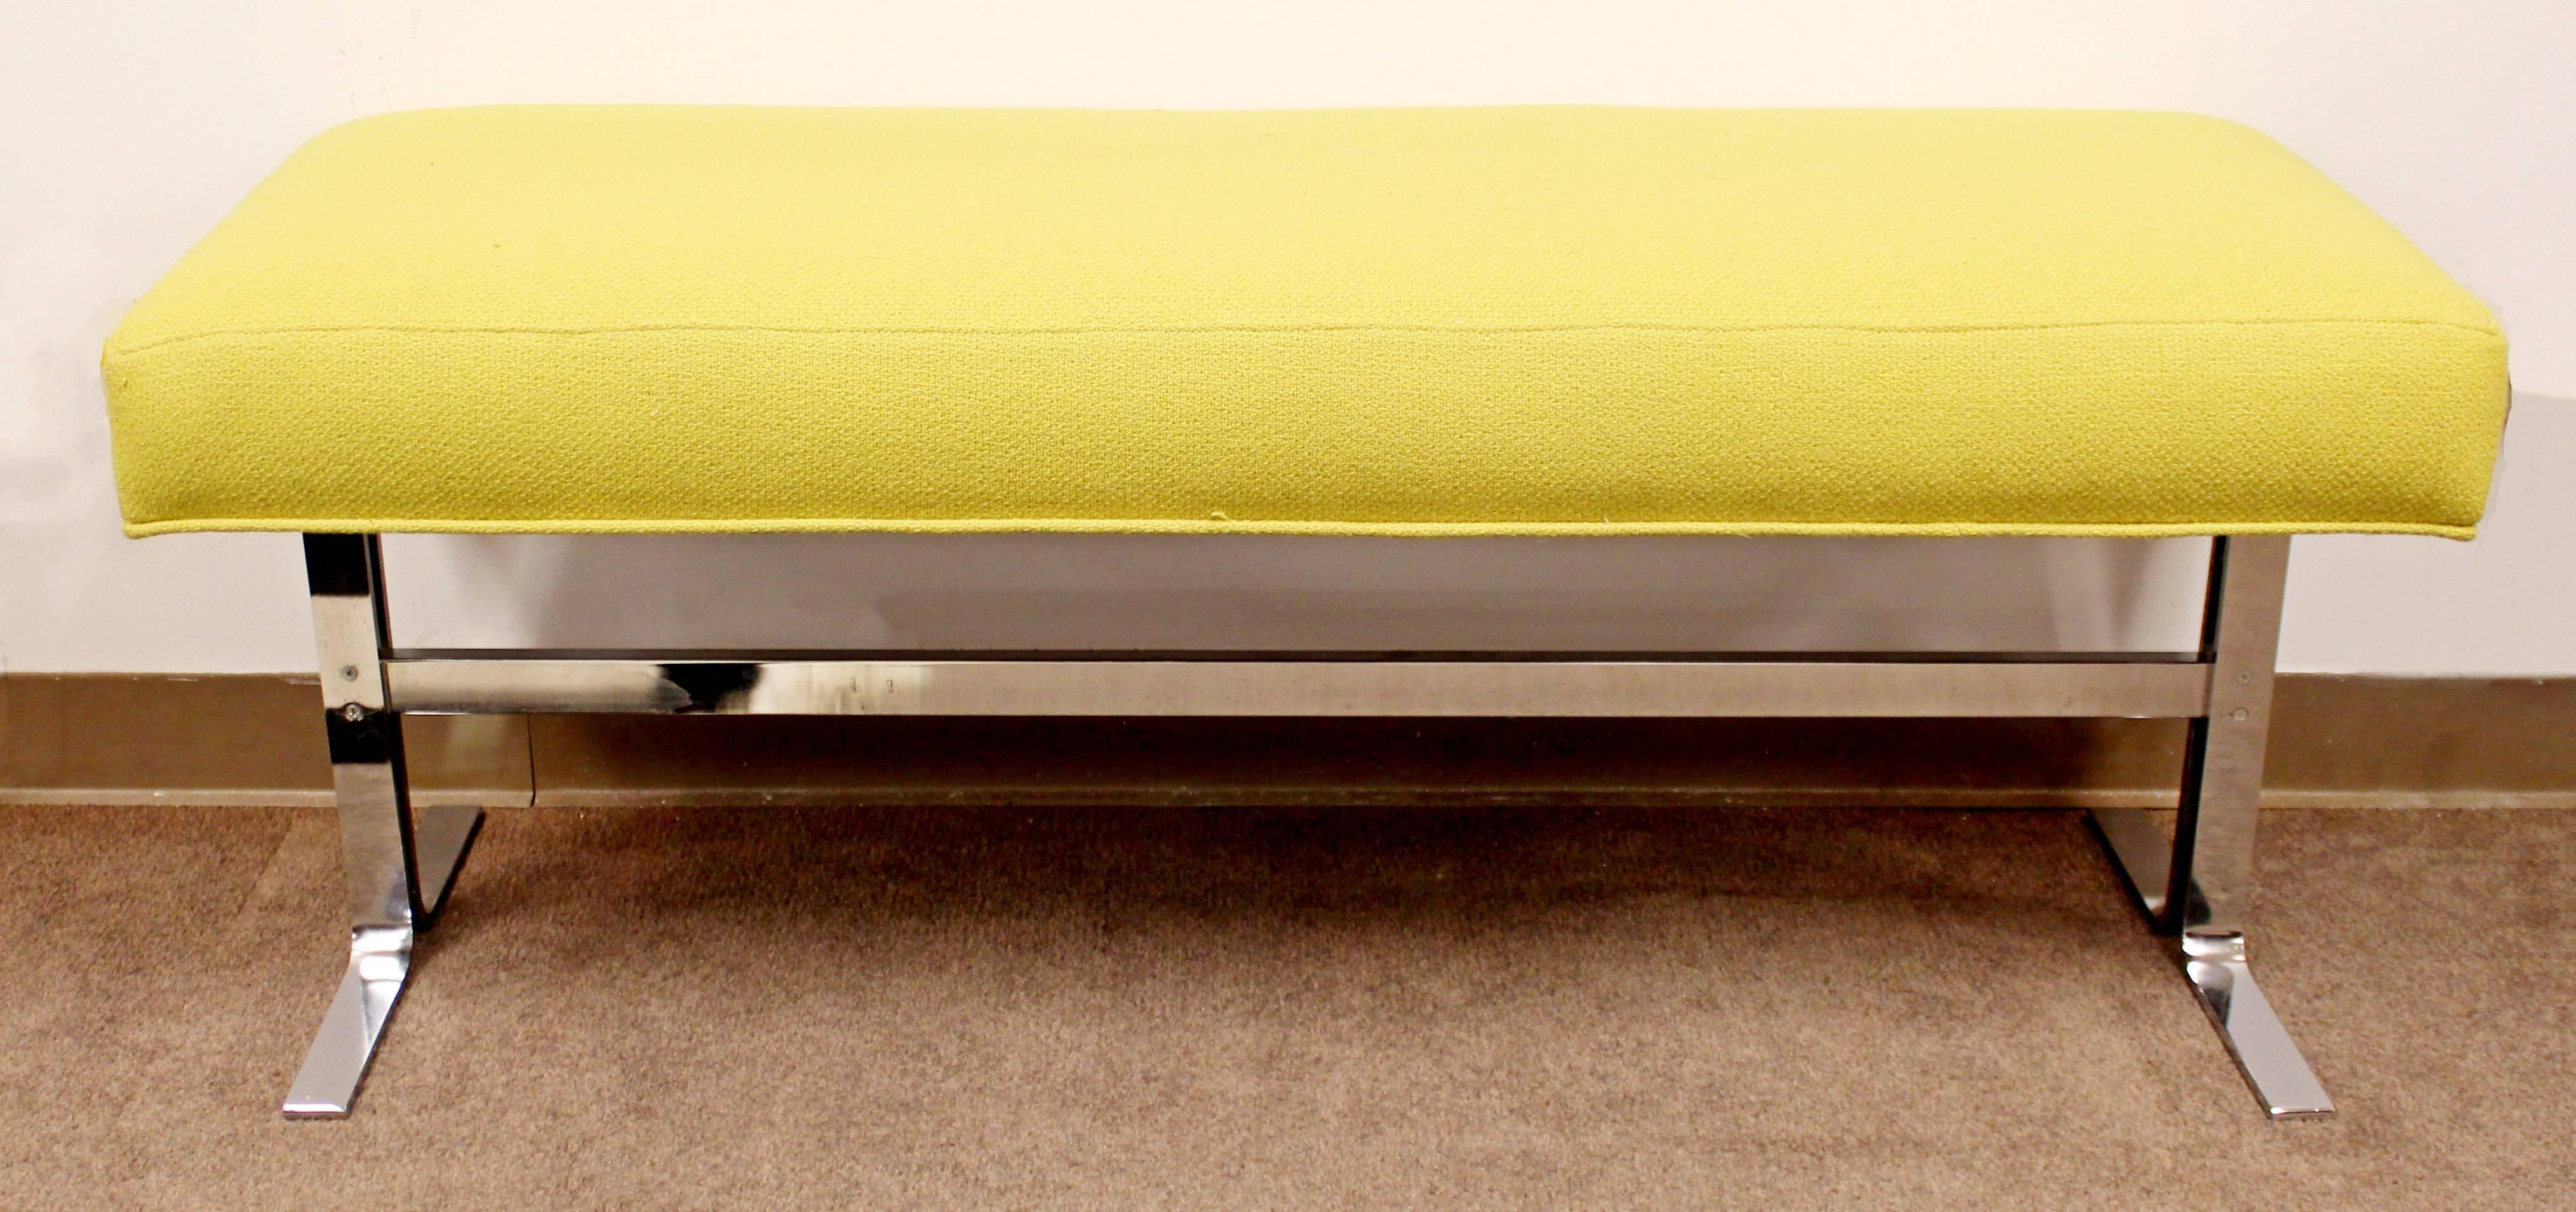 For your consideration is a yellow on chrome, bench by Pace. Just back from being professionally reupholstered in a nubby yellow Kravets fabric. In excellent condition. The dimensions are 50